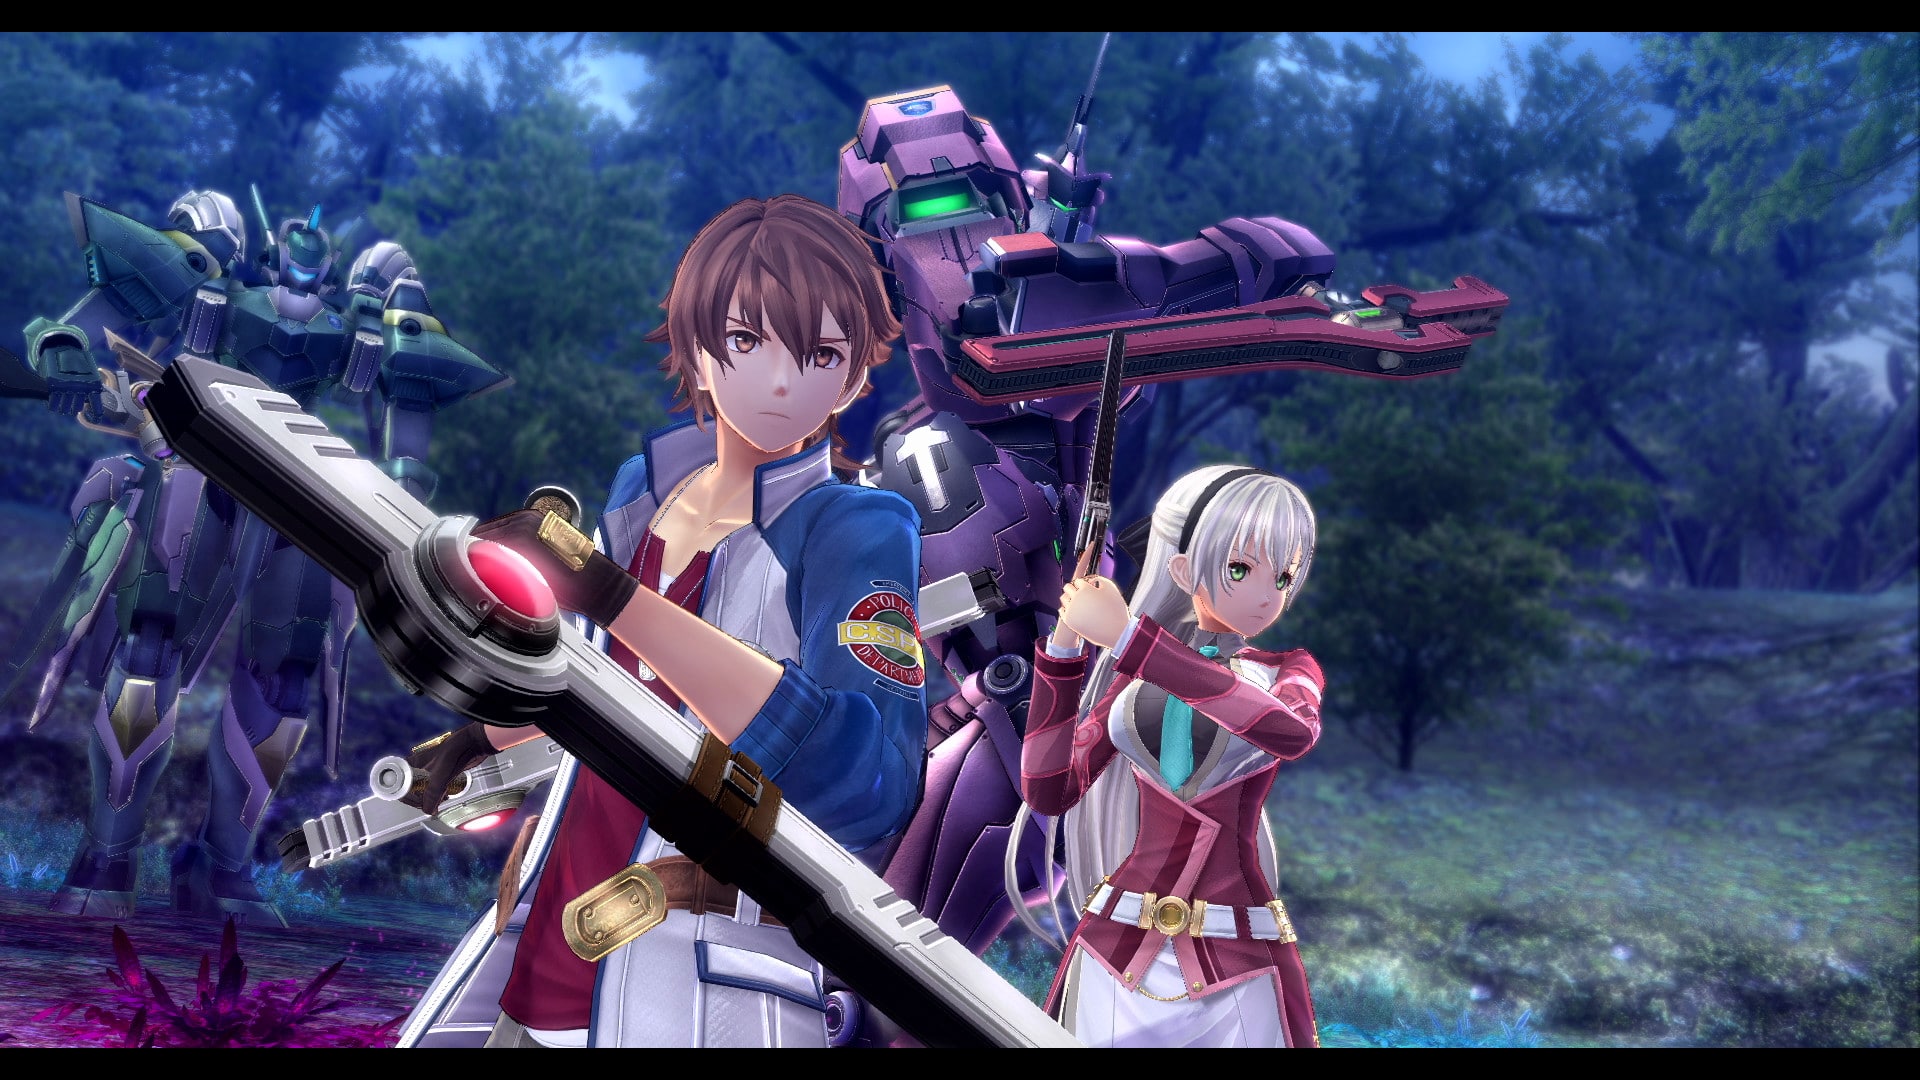 Trails of cold steel 4 test 01 1